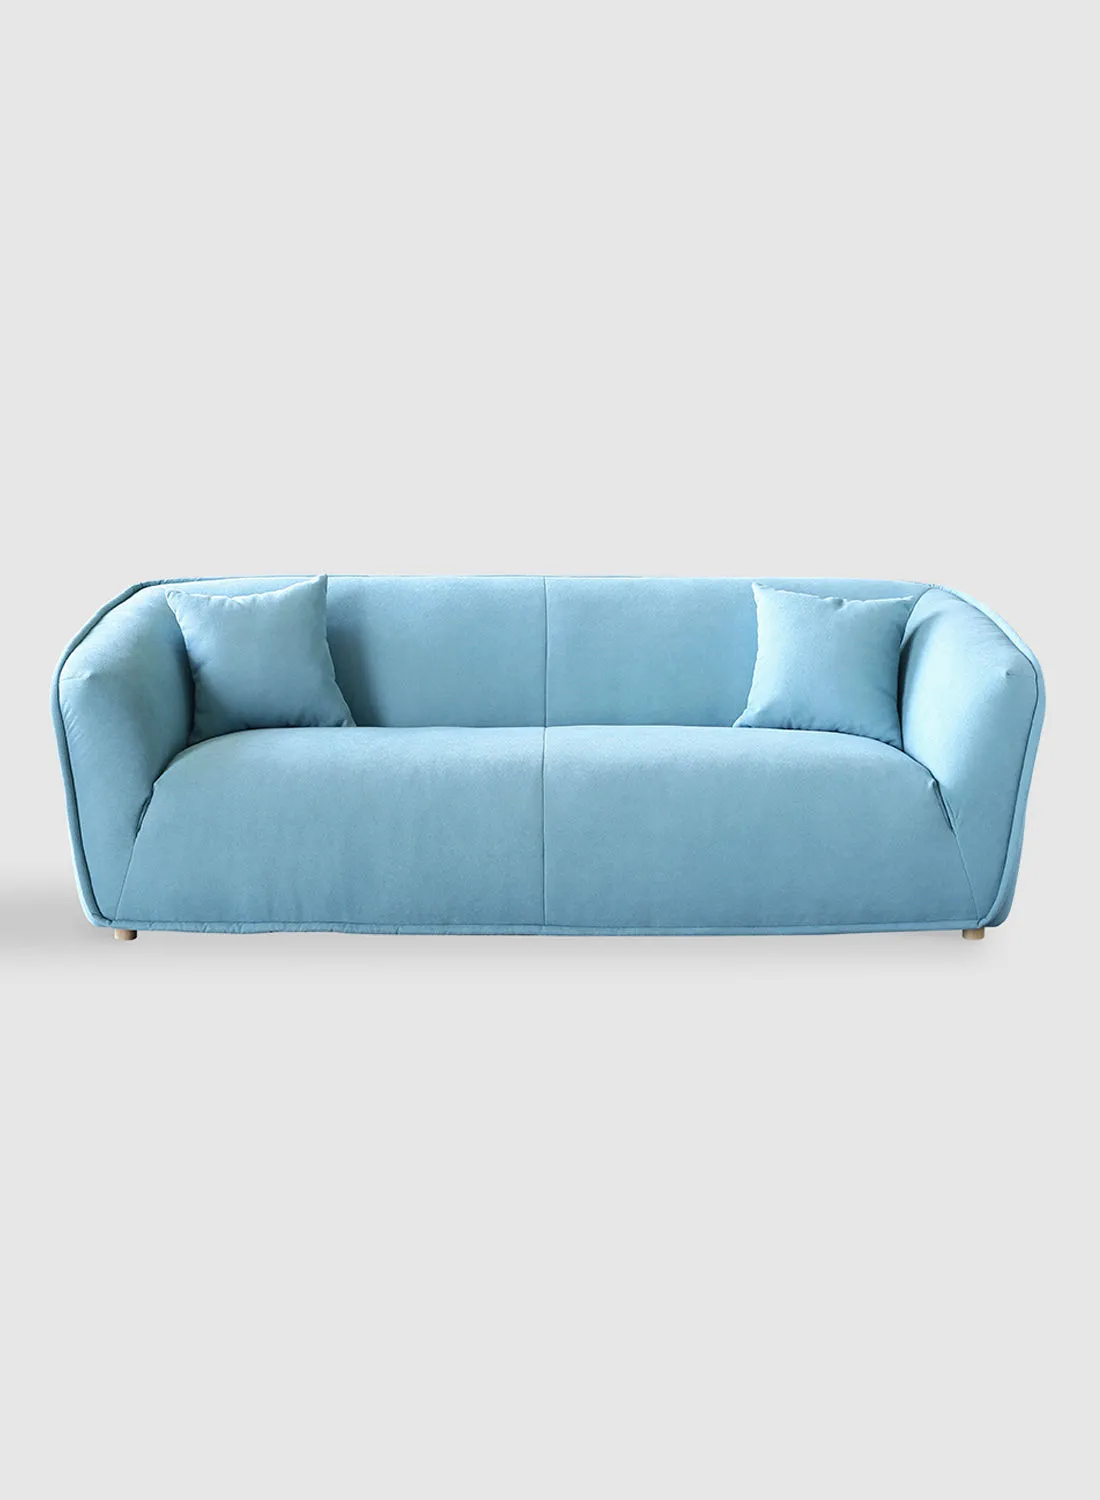 Switch Sofa - Upholstered Fabric Baby Blue Wood Couch - 2150 X 860 X 740 - 3 Seater Sofa Relaxing Sofa